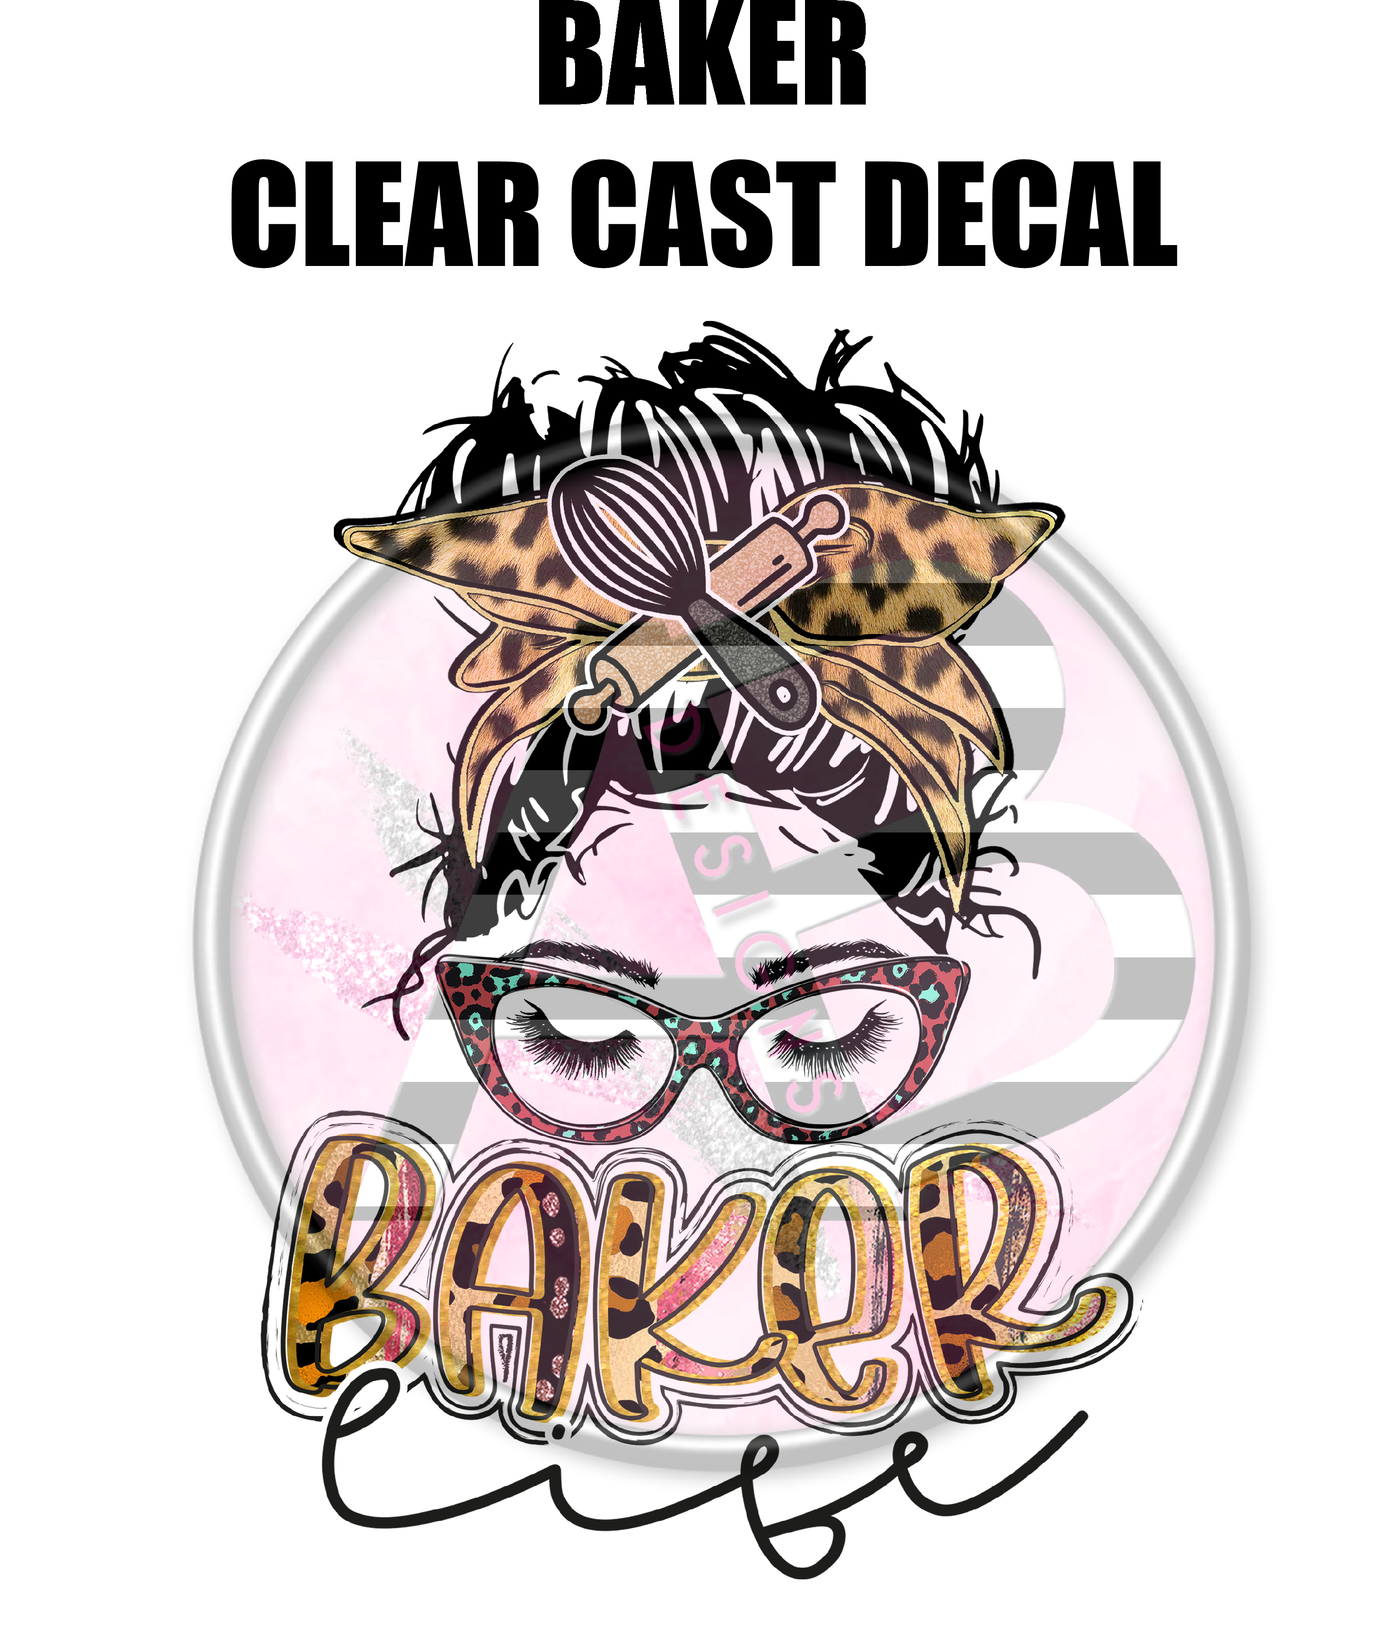 Baker 1 - Clear Cast Decal